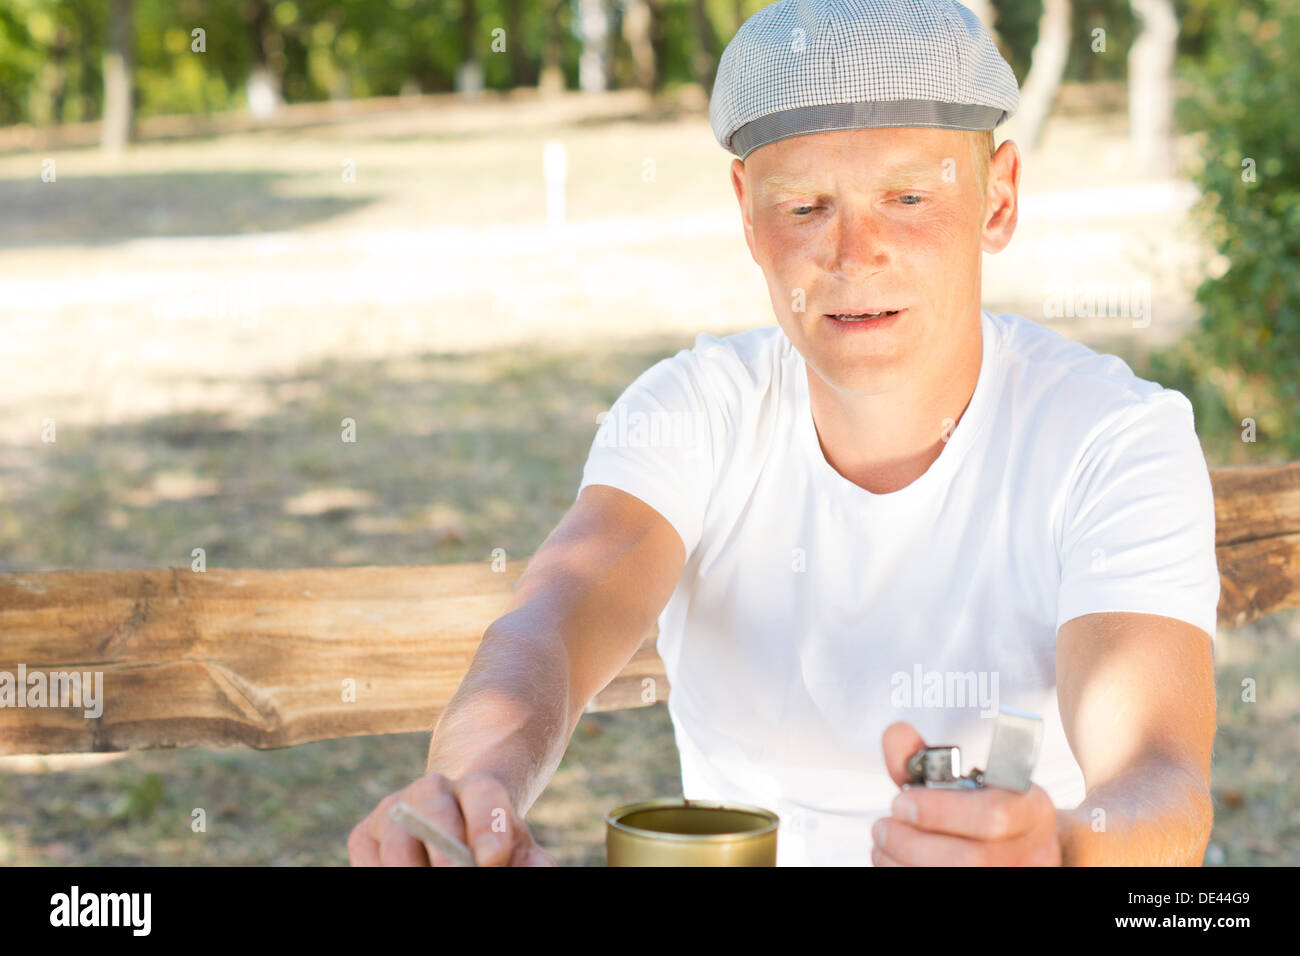 Middle-aged man about to light a cigarette concentrating on flicking his lighter to get a flame Stock Photo